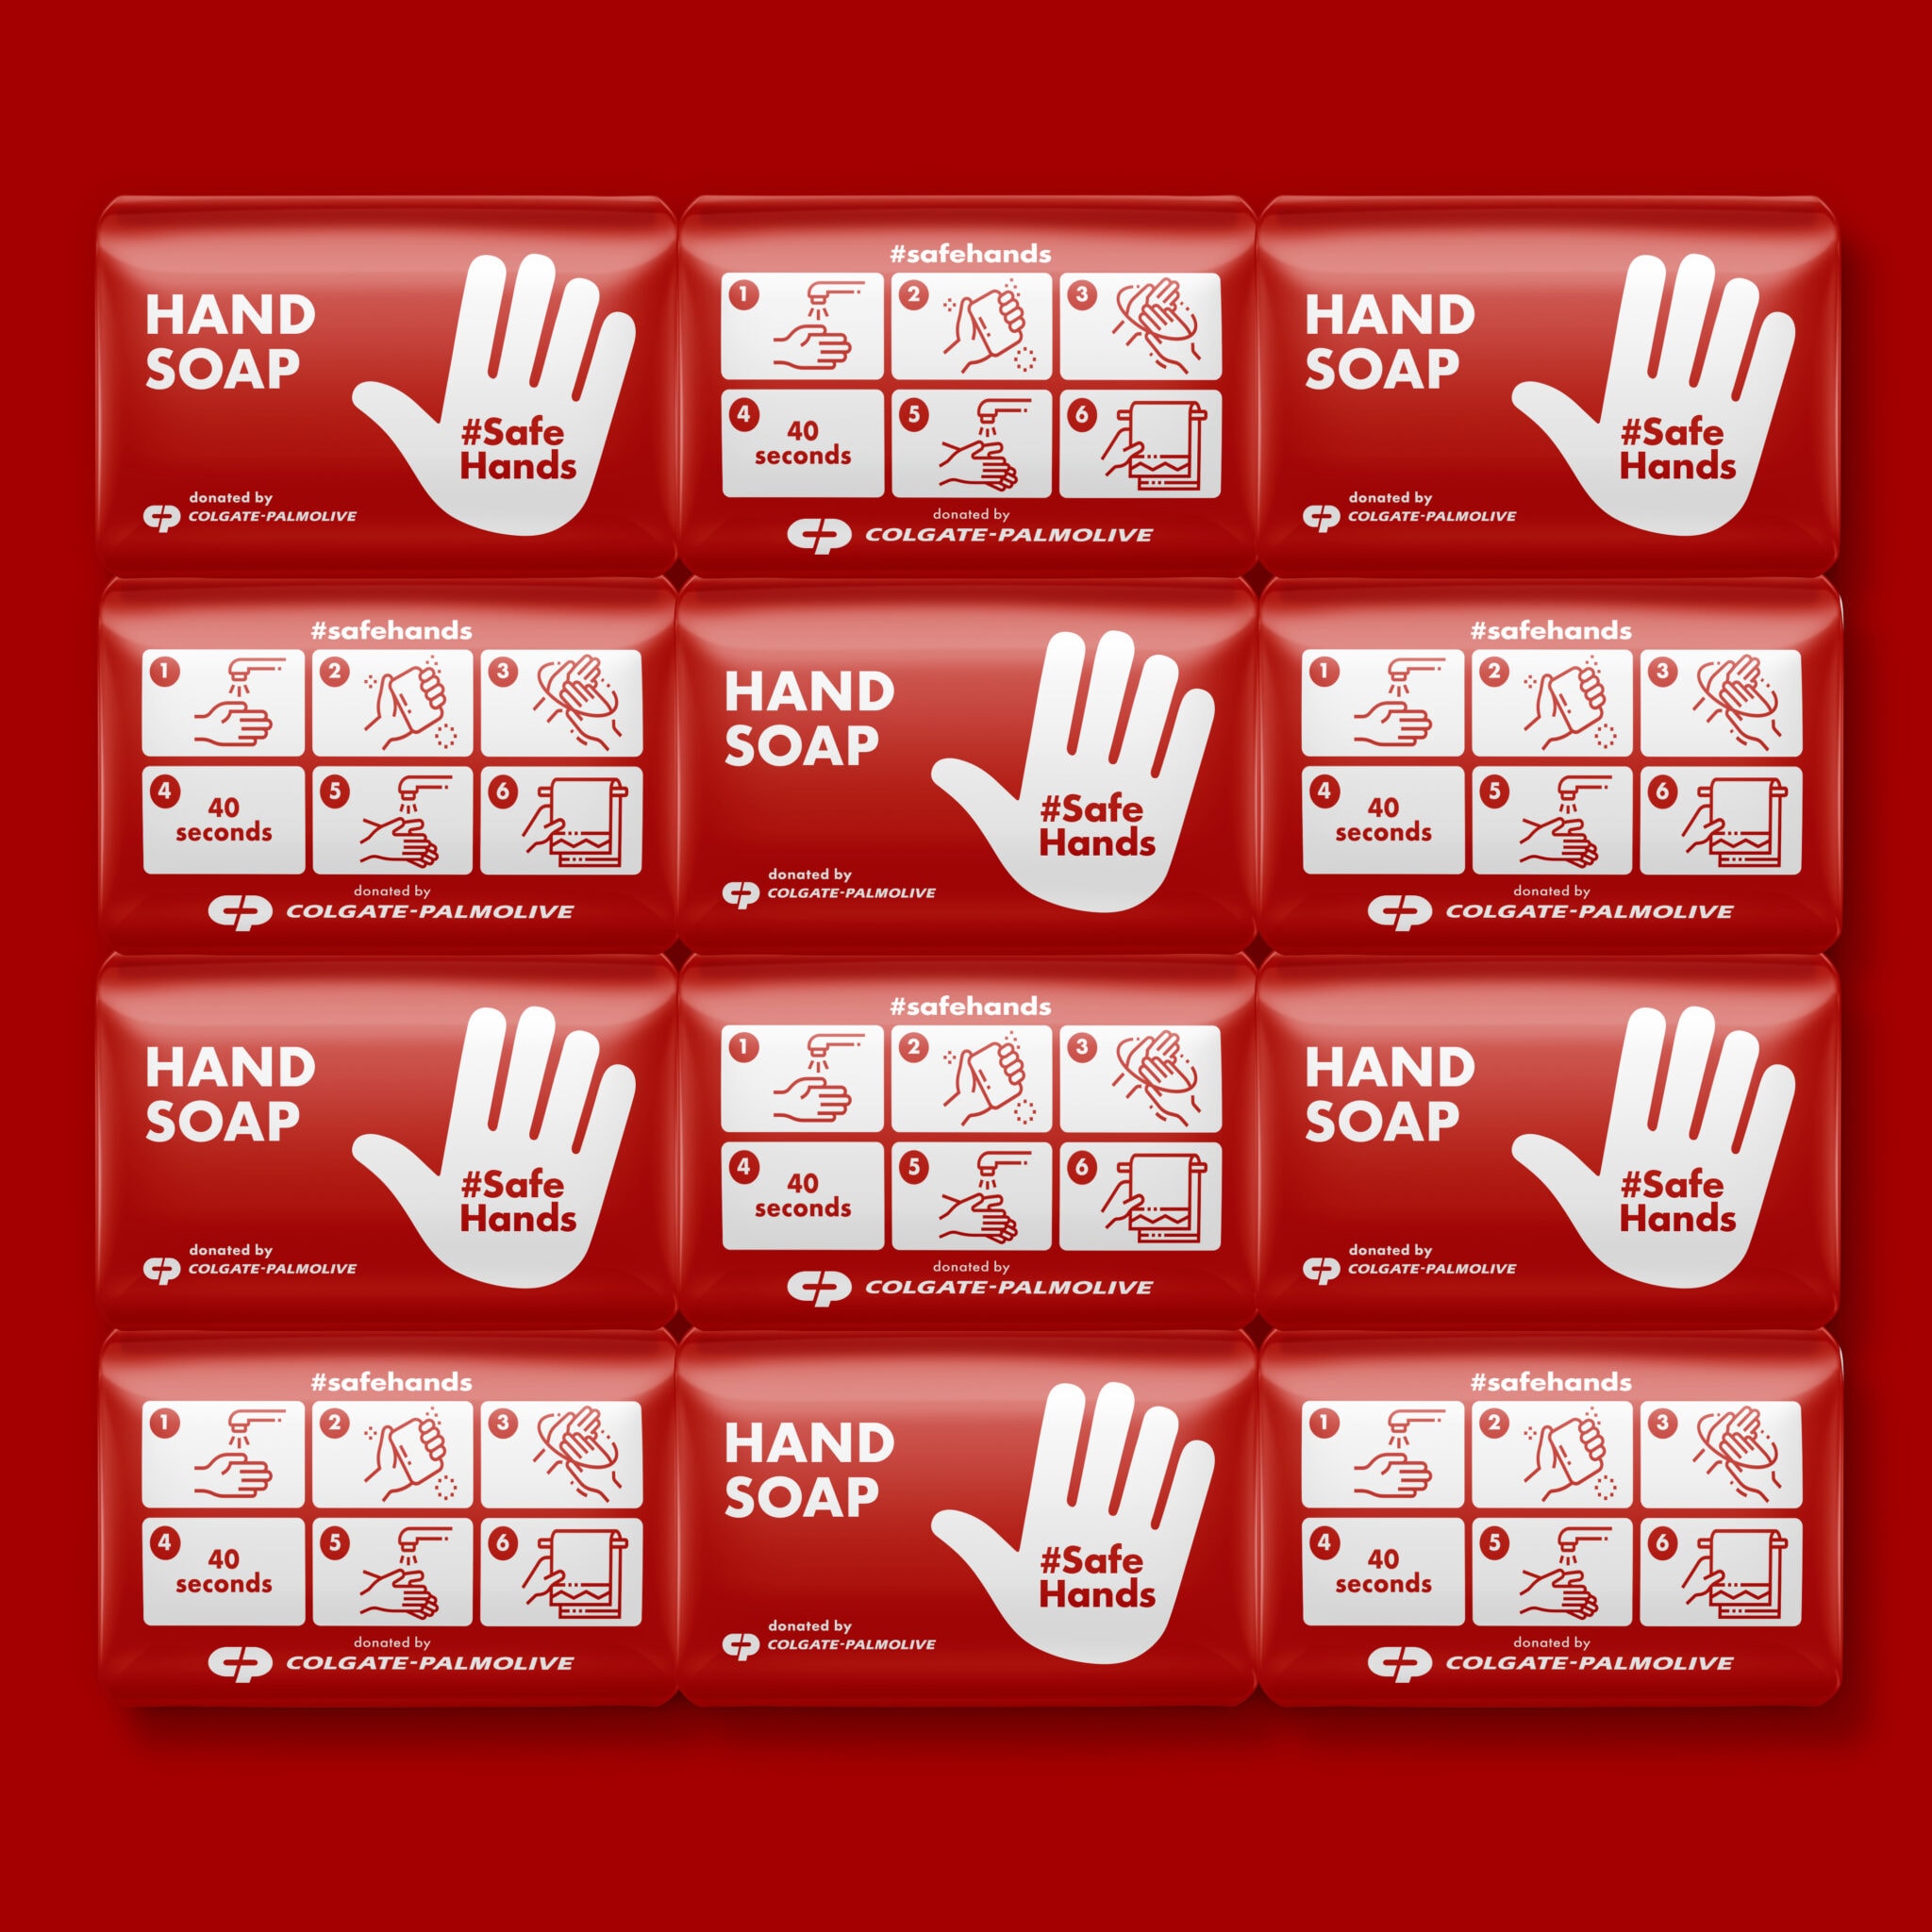 safe hands soap intructions on hand washing